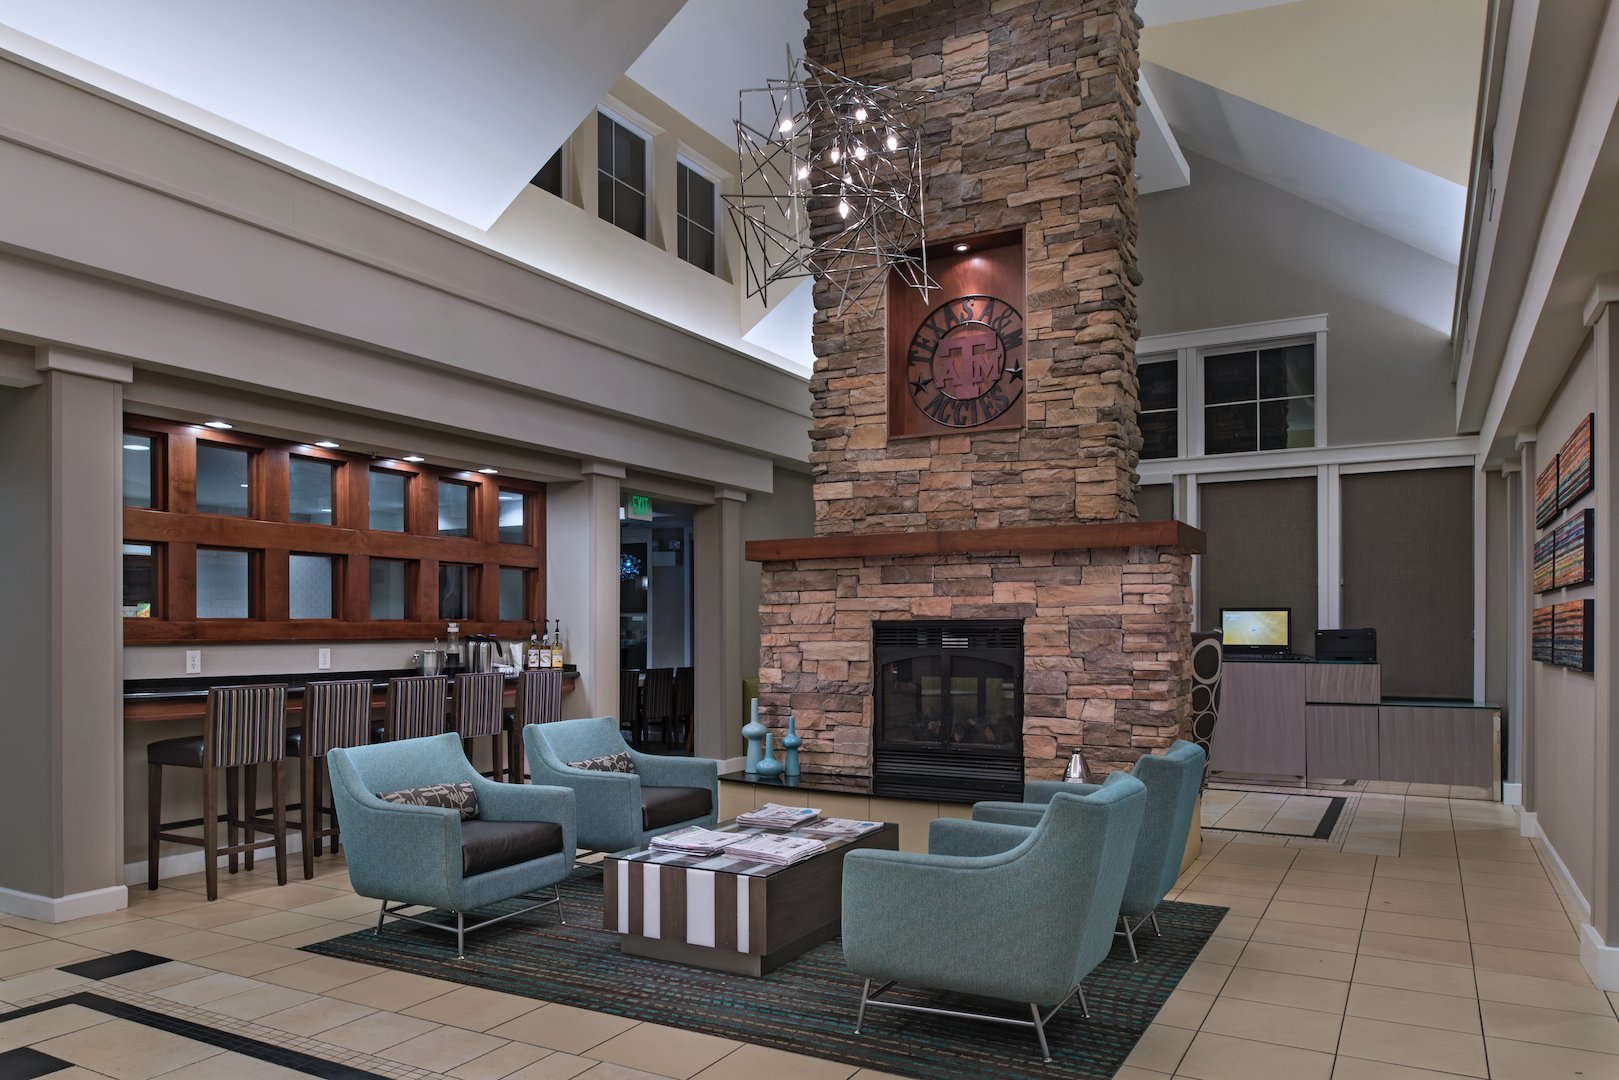 Photo of Residence Inn Bryan College Station, College Station, TX